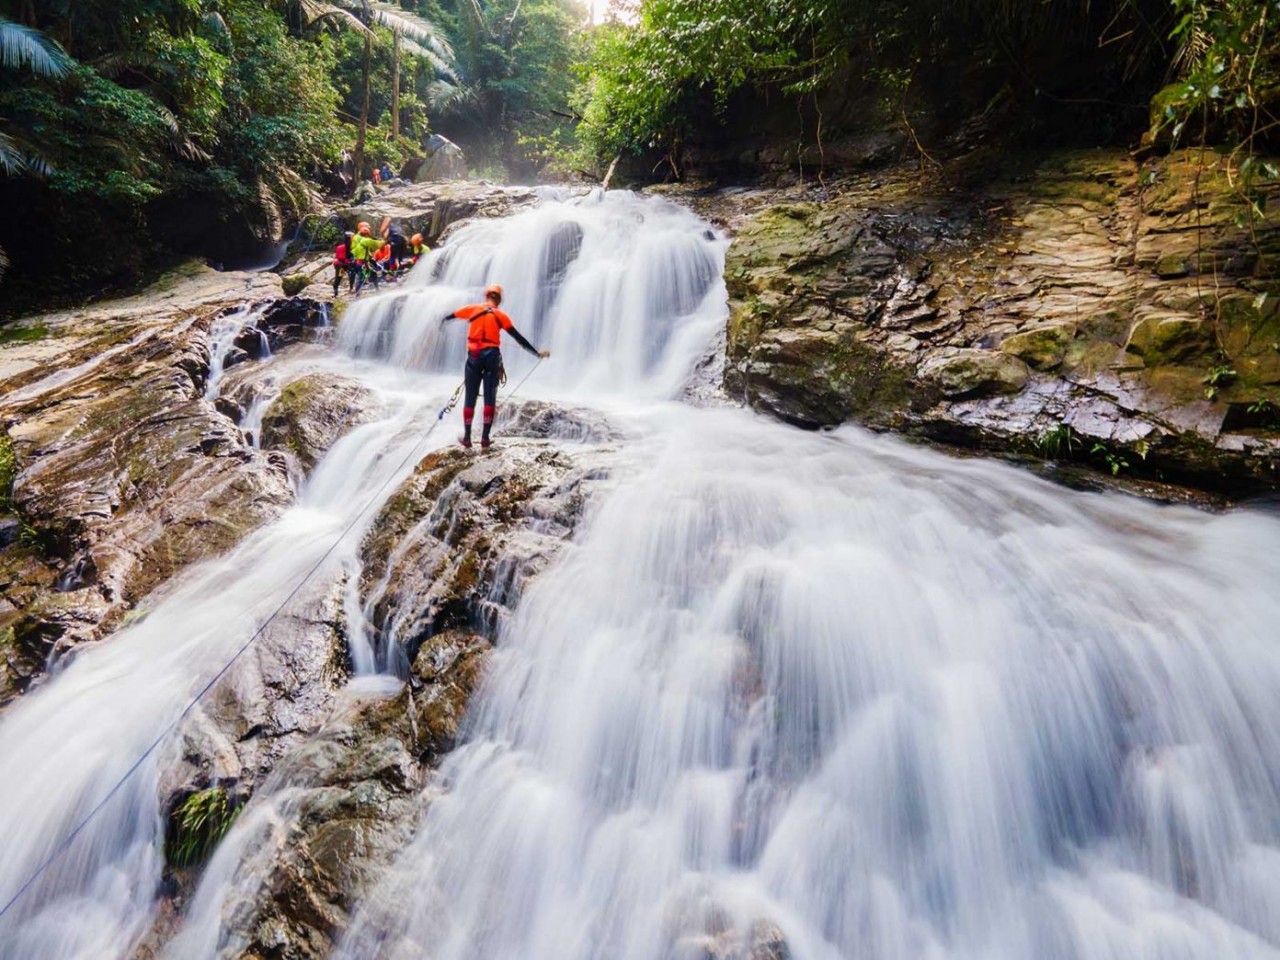 Visitors experience the adventurous rope swing over Duong Cam waterfall. Photo: Netin